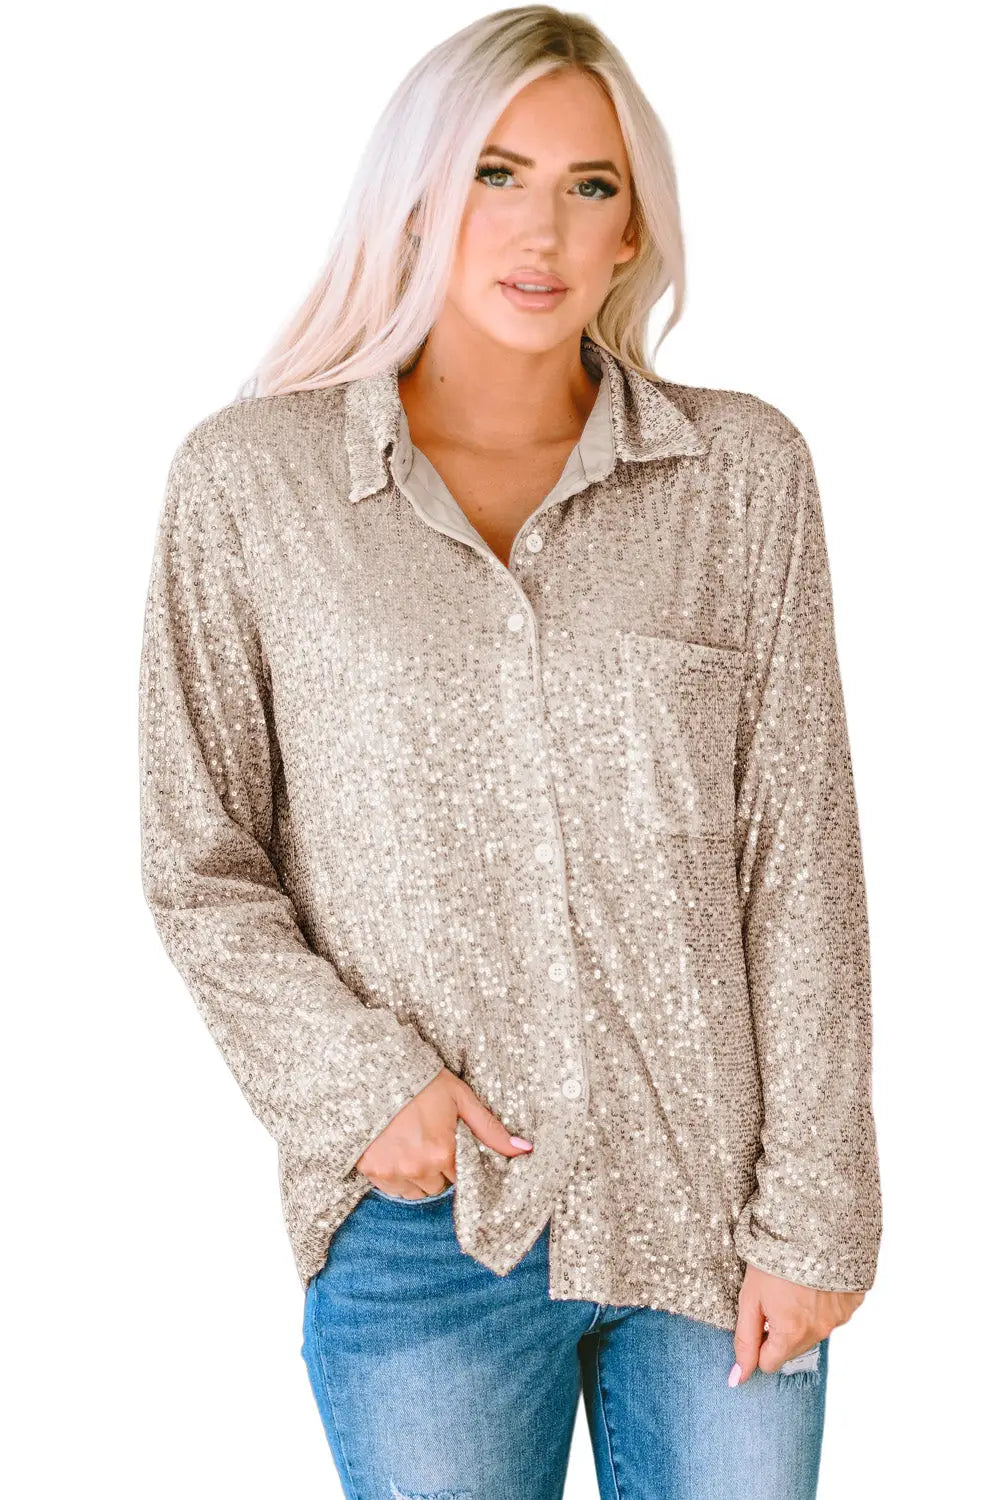 Apricot sequin collared bust pocket buttoned shirt - tops